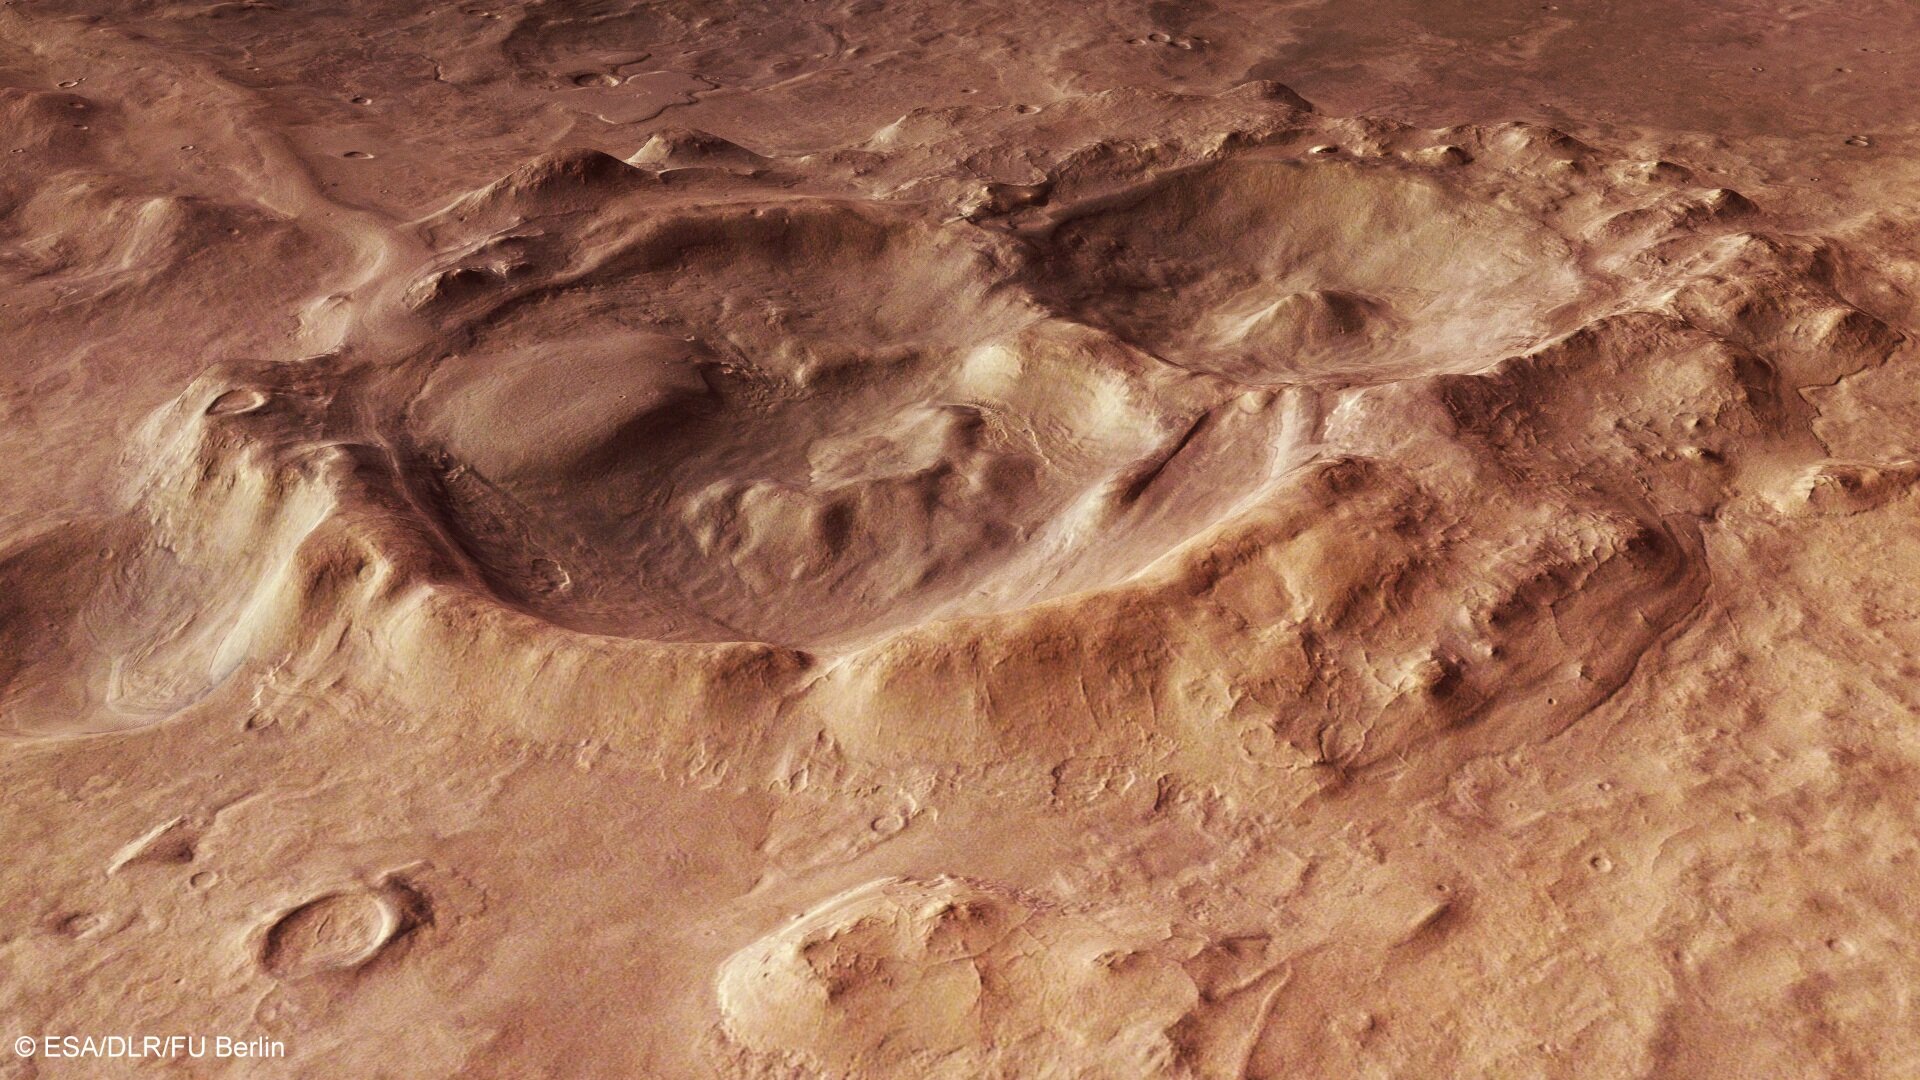 Craters within the Hellas Basin